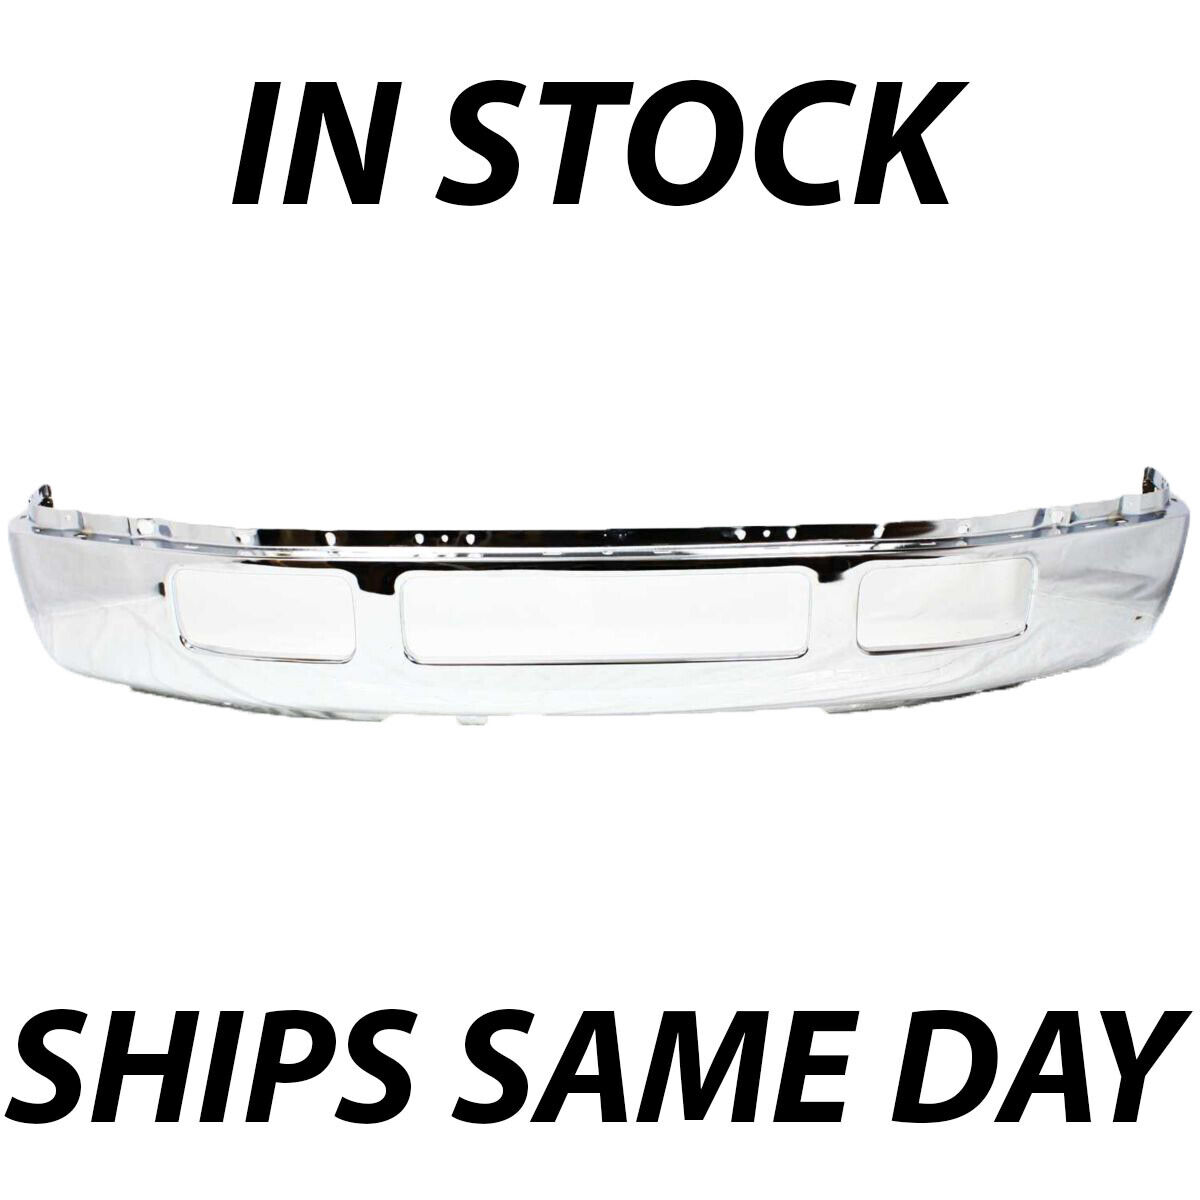 NEW Chrome - Steel Bumper for 2005-2007 Ford F250 F350 Super Duty Without Flares